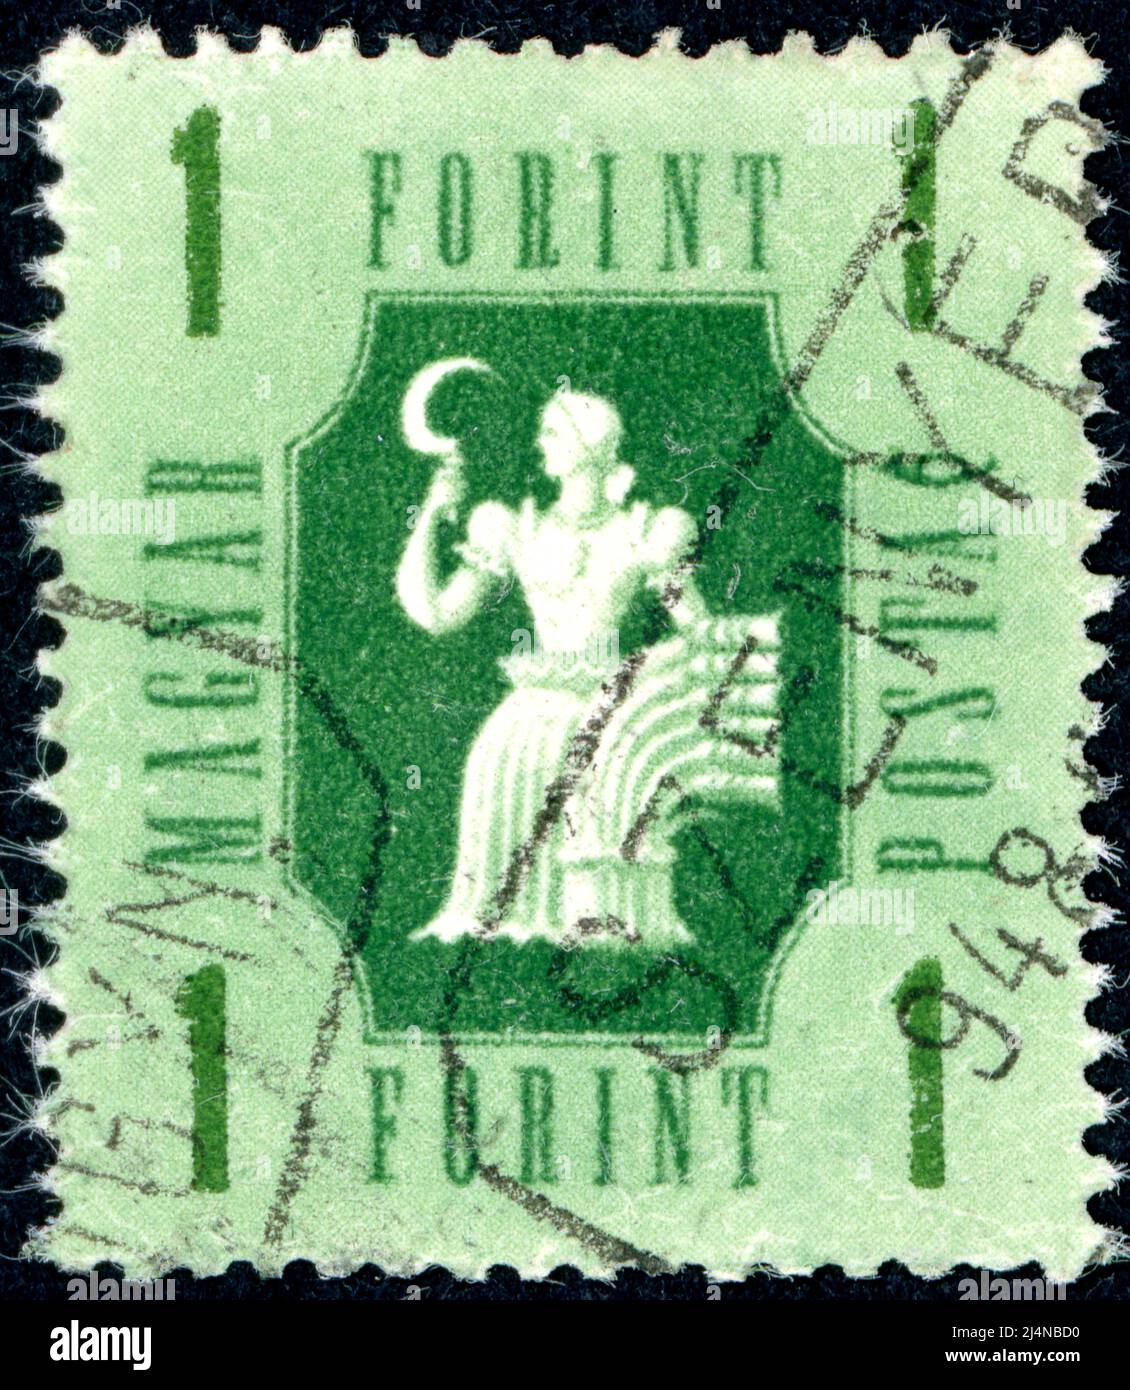 HUNGARY - CIRCA 1946: A stamp printed in Hungary, depicts a woman with a sickle, the symbol of agriculture, circa 1946 Stock Photo